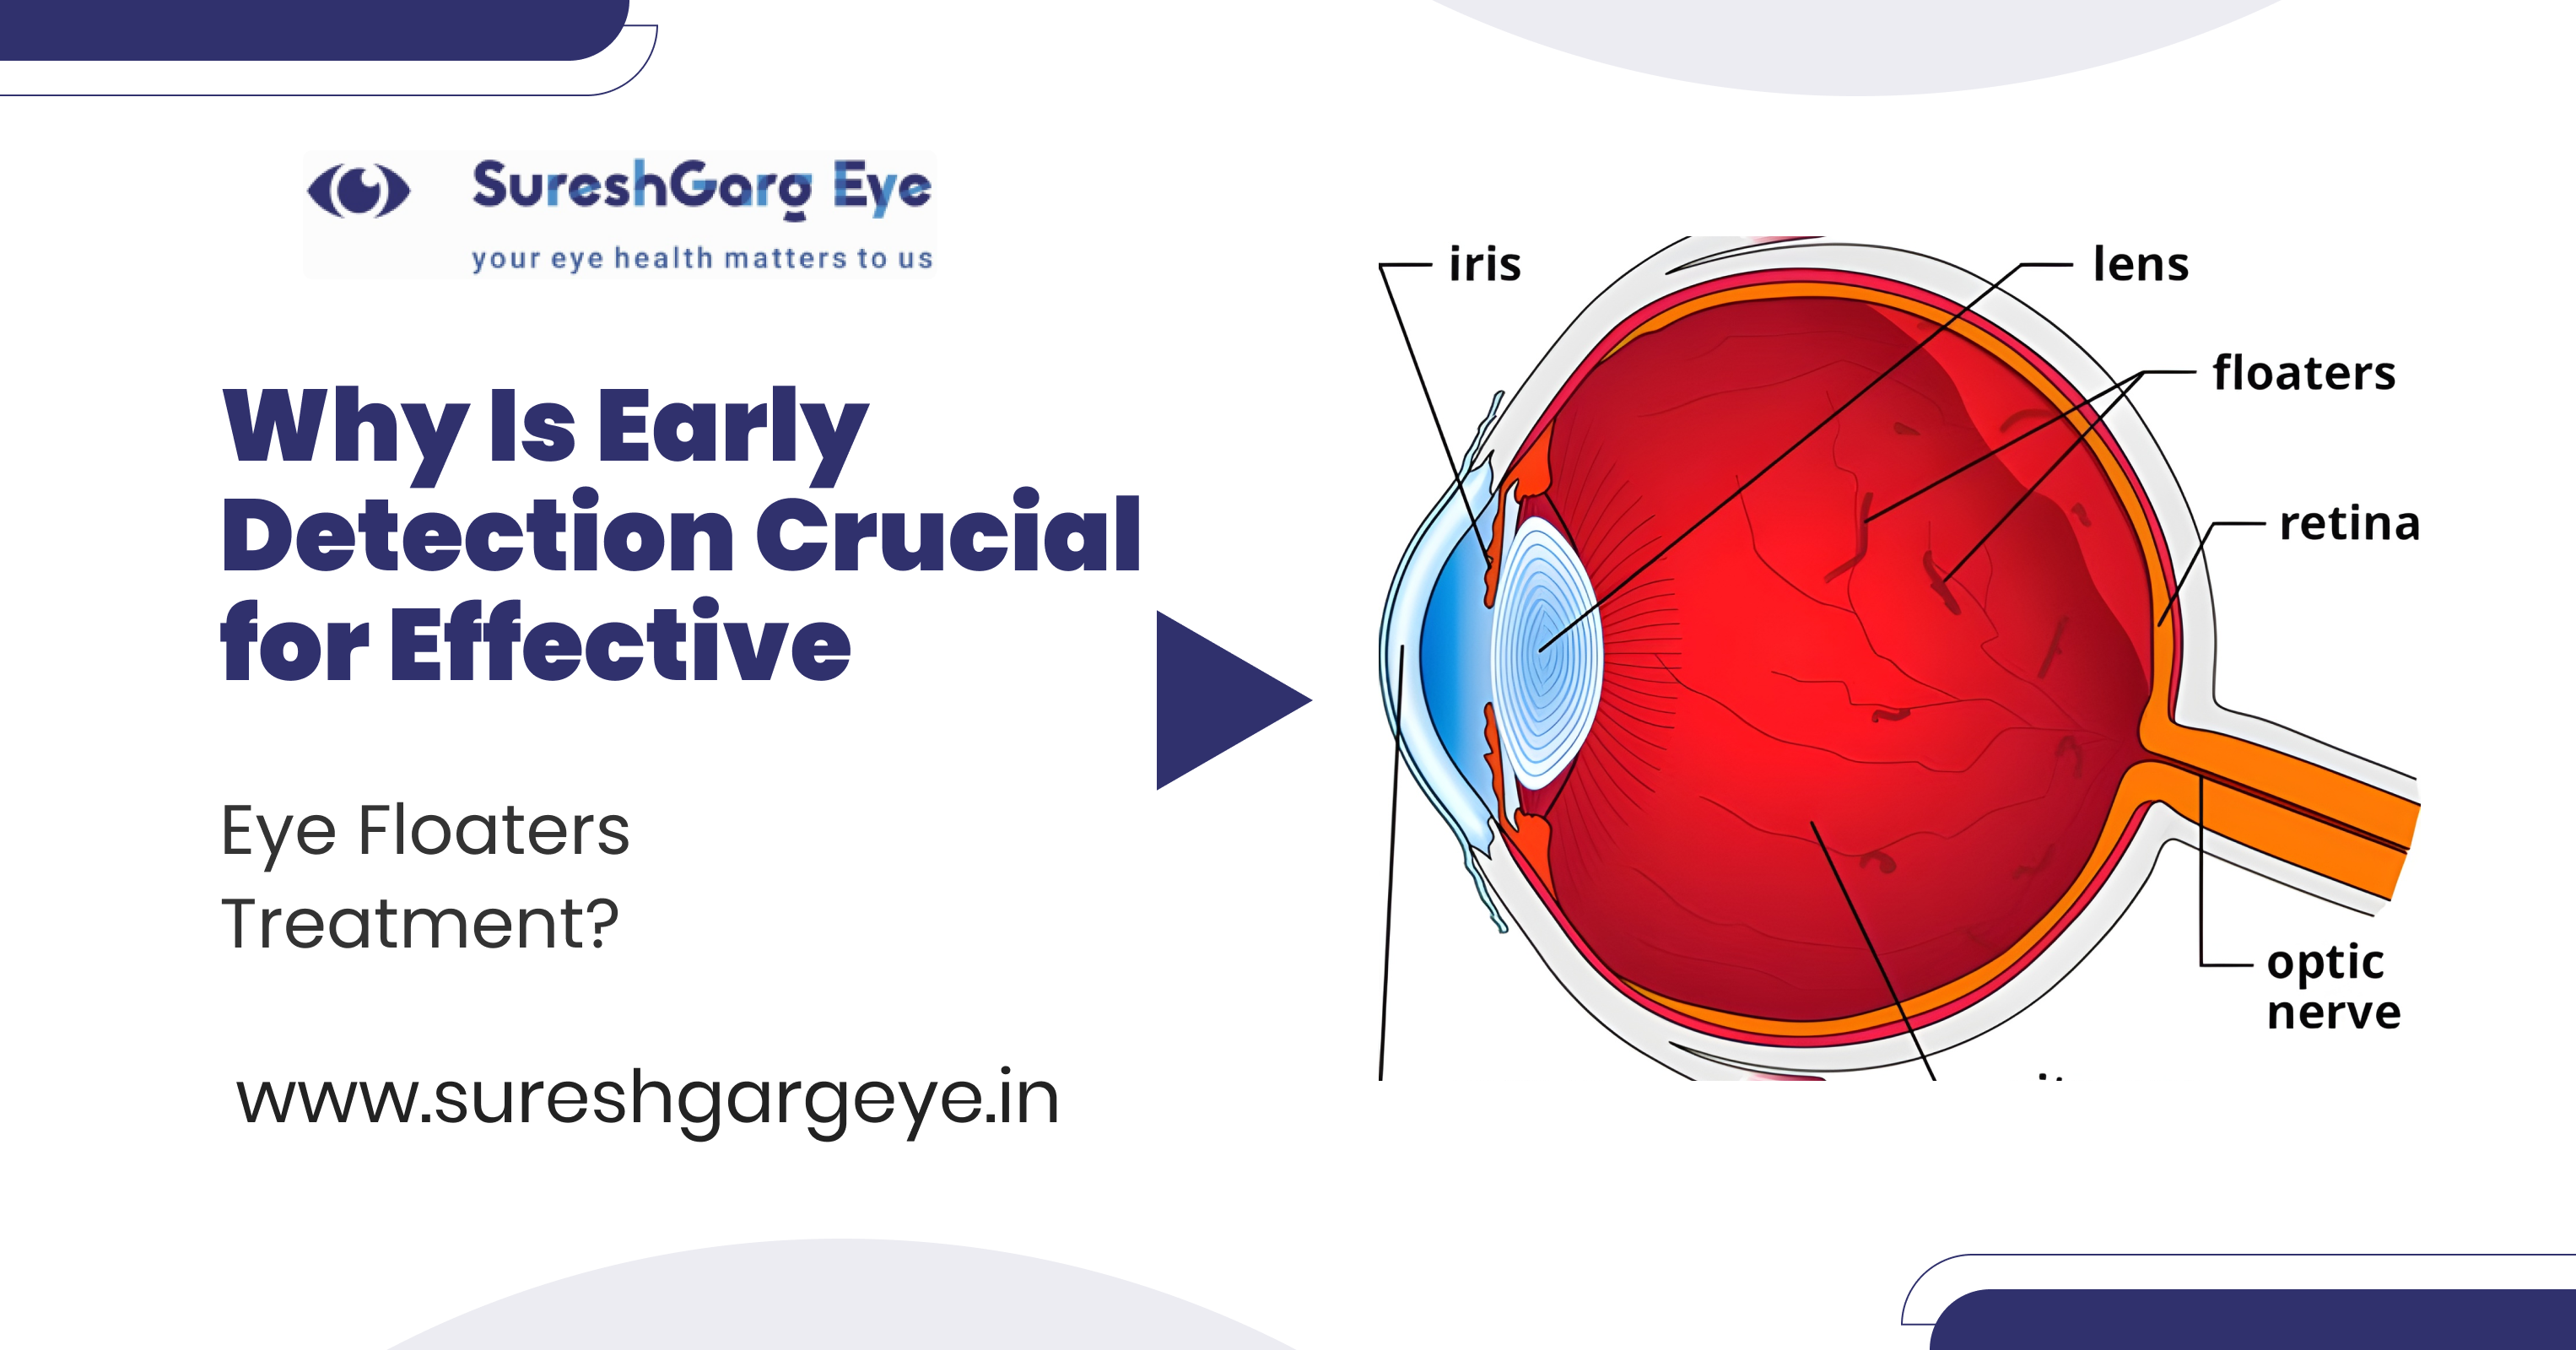 Why Is Early Detection Crucial for Effective Eye Floaters Treatment?